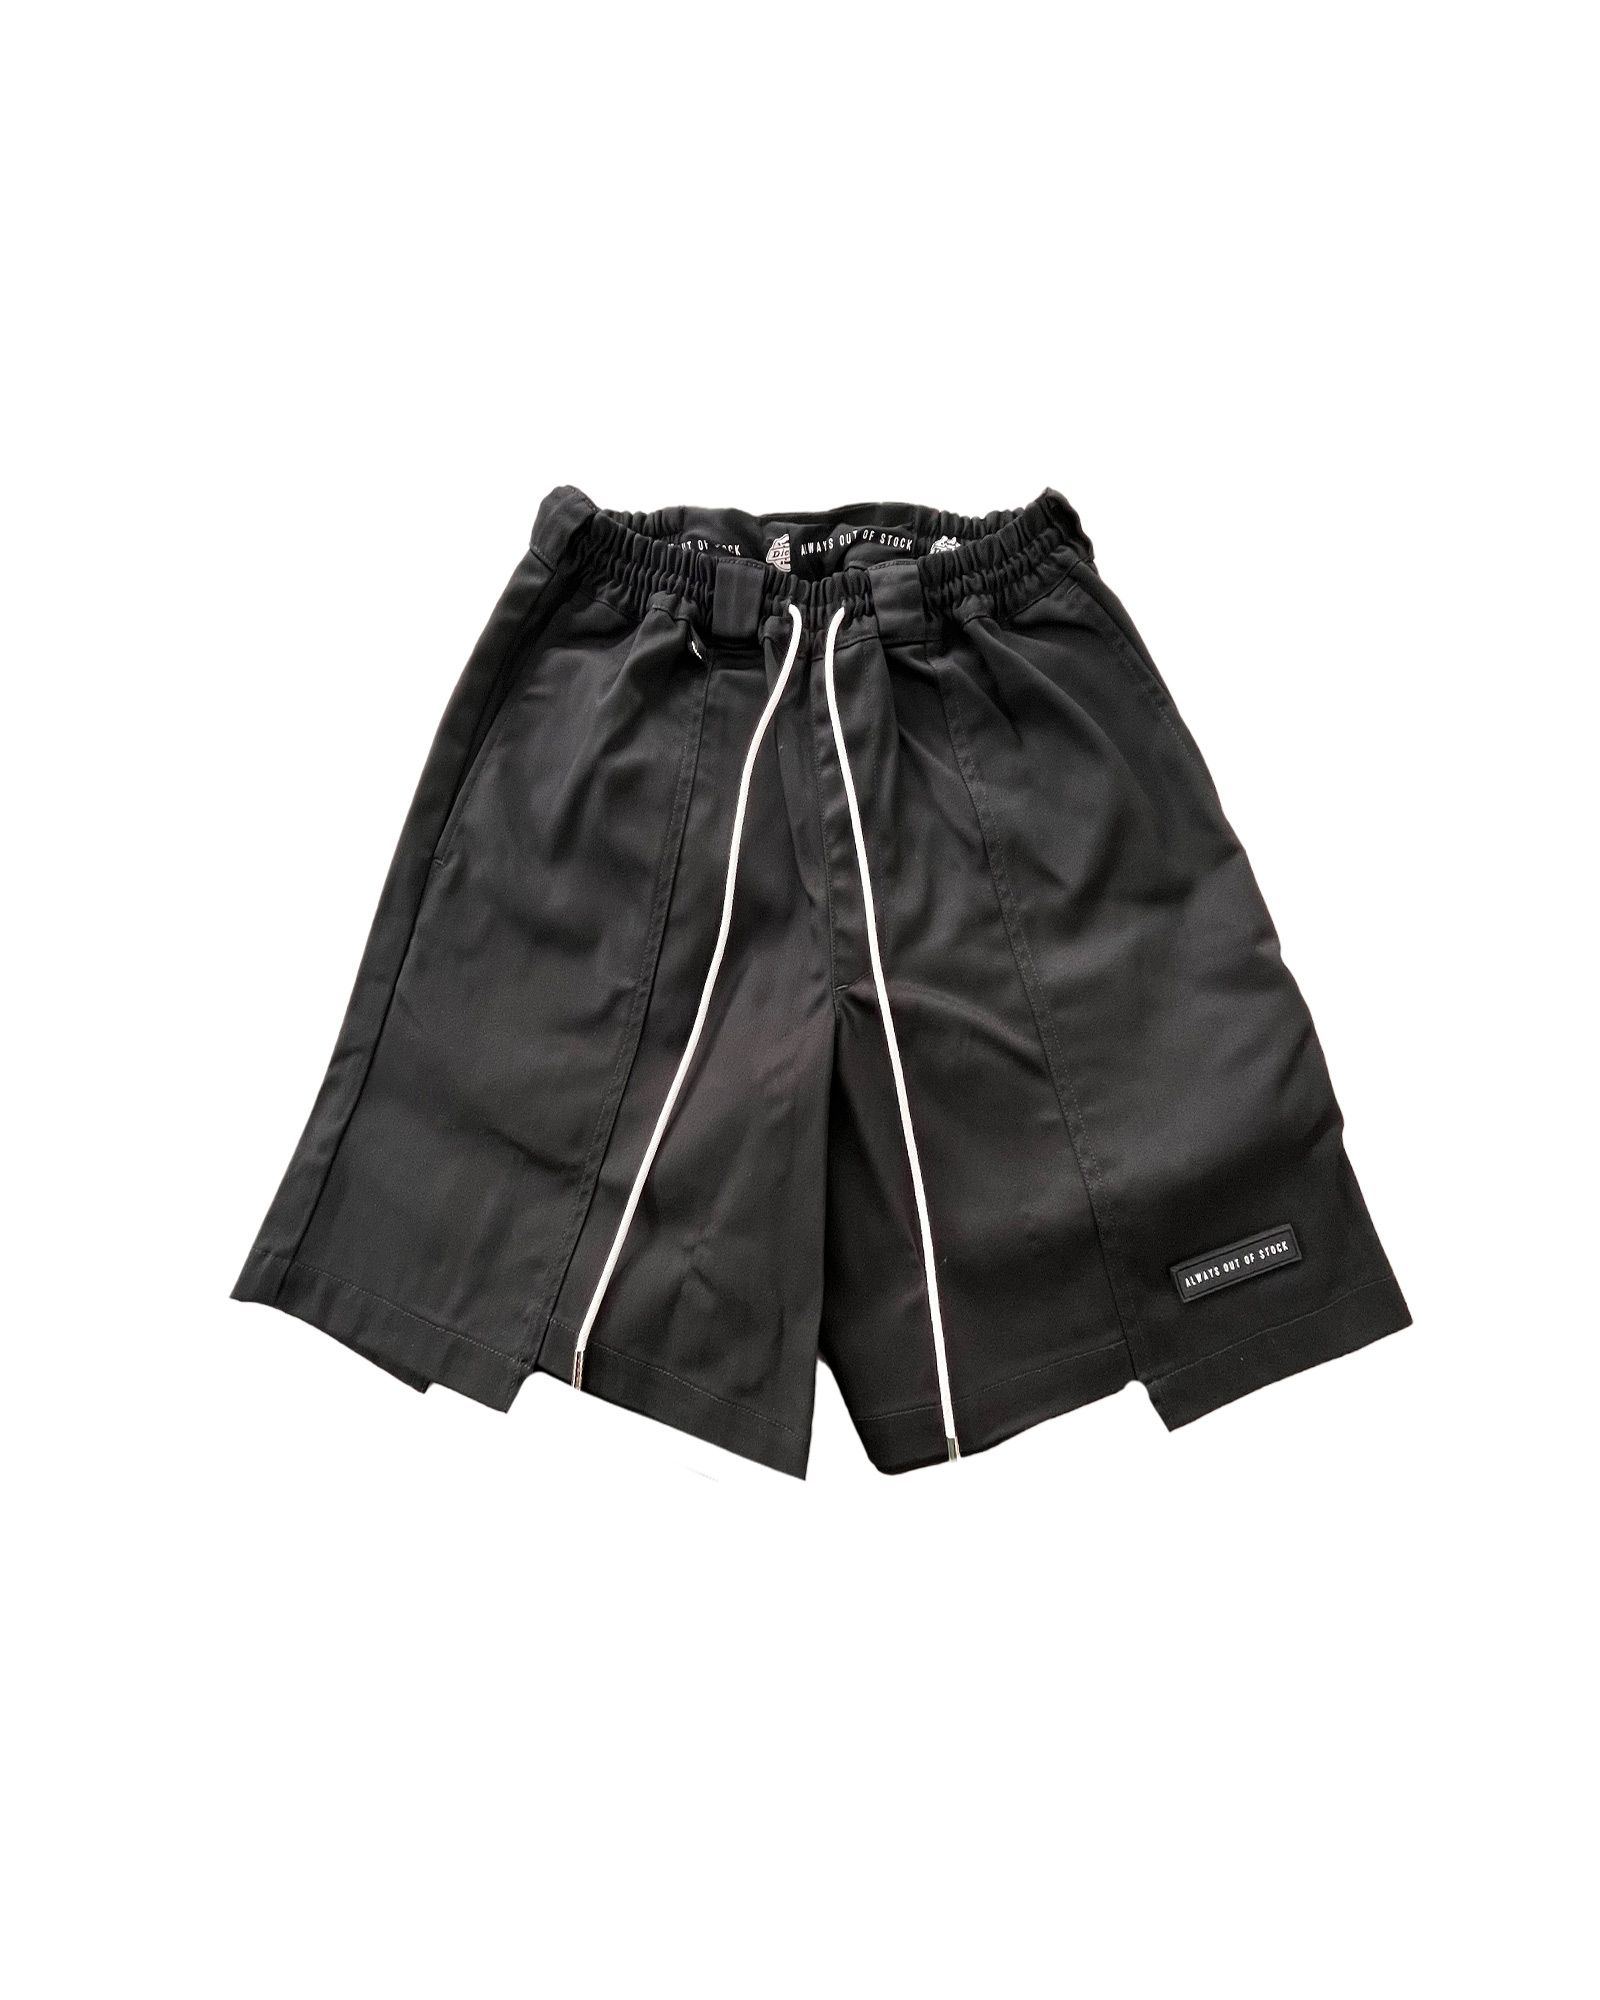 ALWAYS OUT OF STOCK - Always out of stock × Dickies switched ...